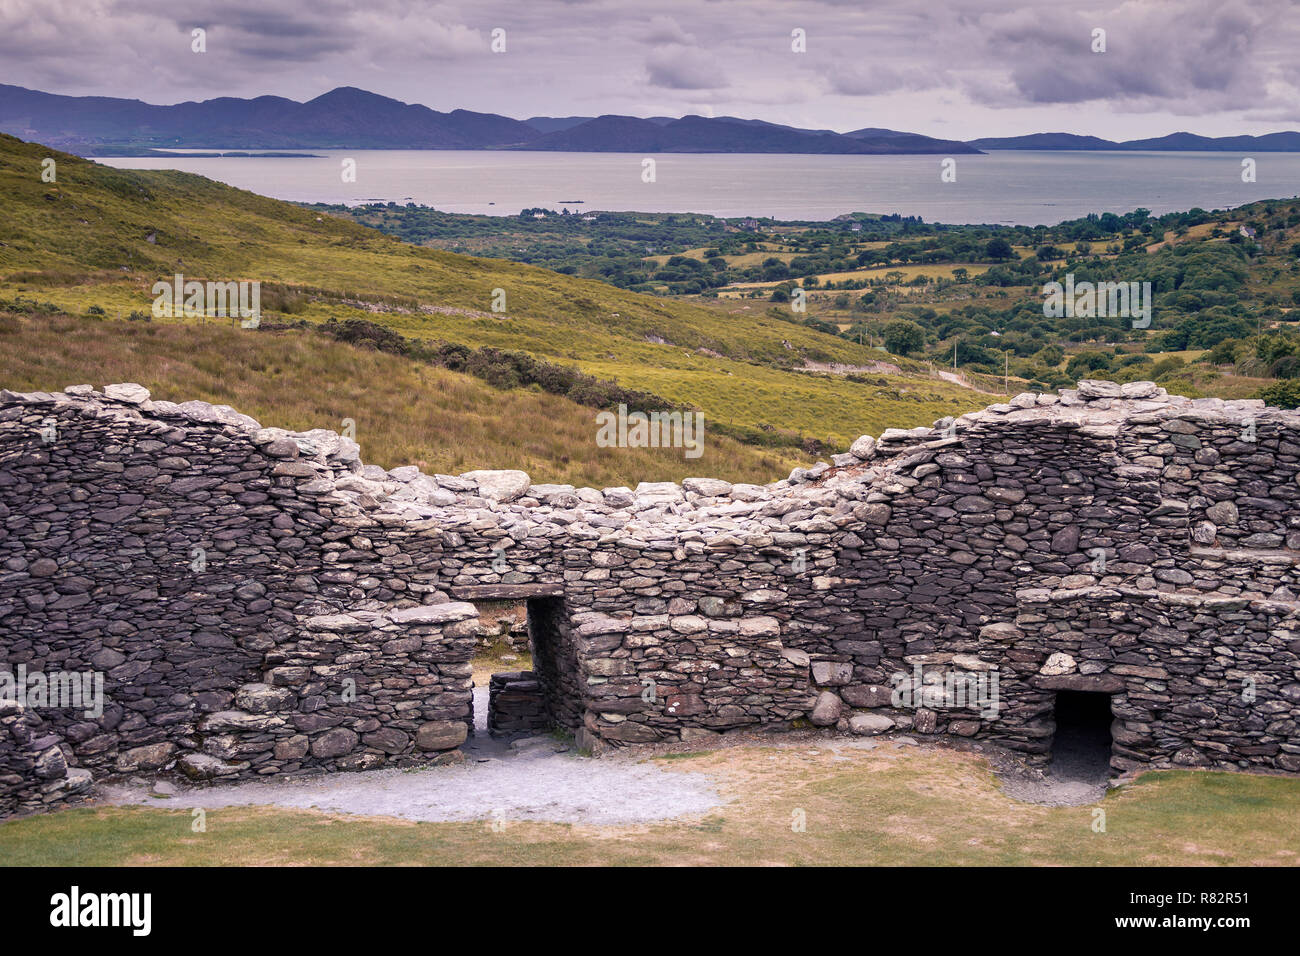 Staigue stone fort, a defensive stronghold built during the iron Age in Sneem, Ireland Stock Photo